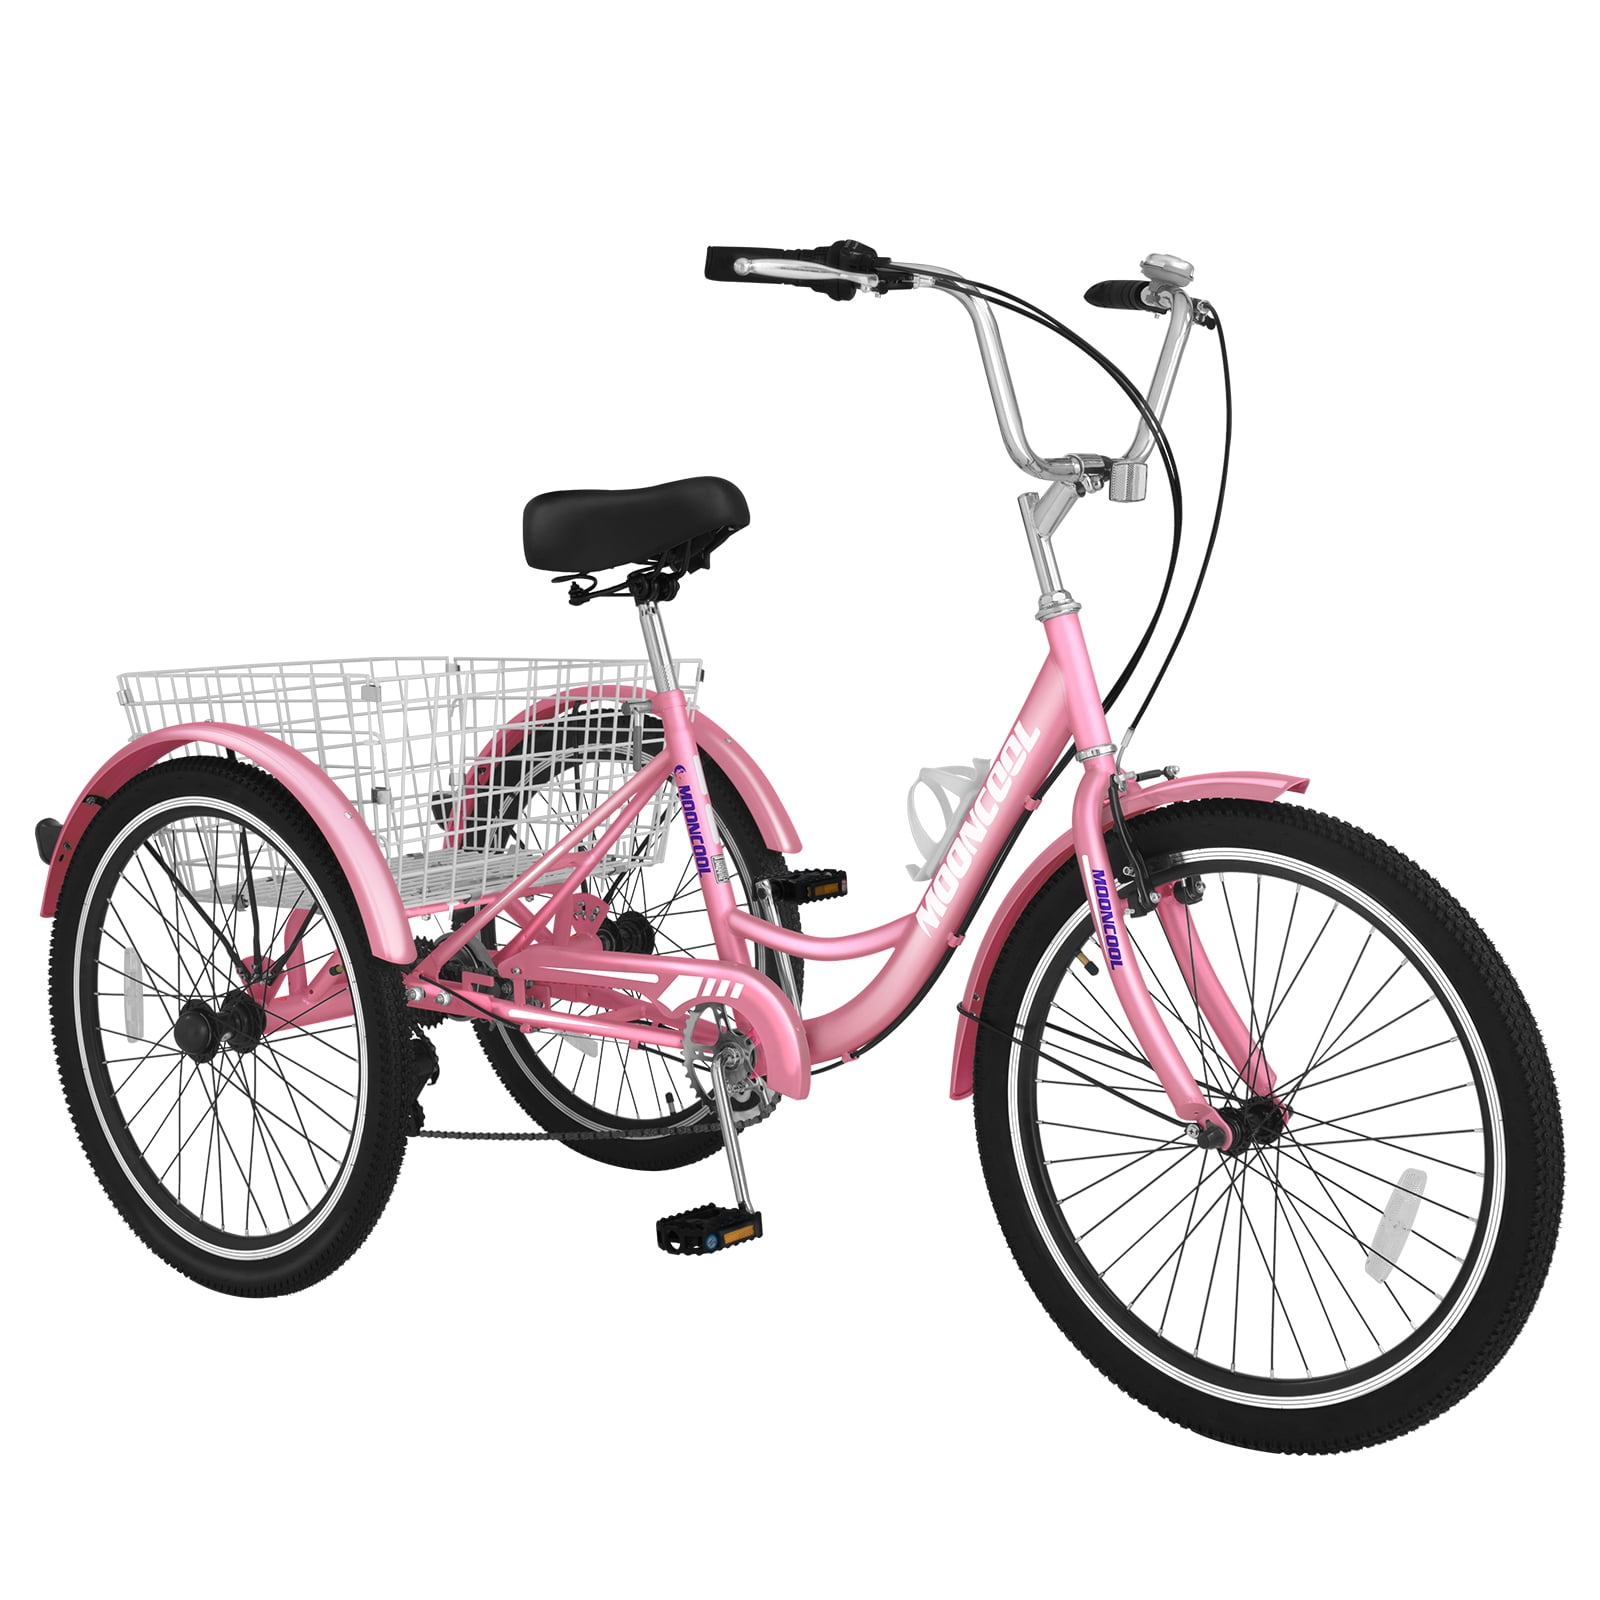 Seniors Women MOPHOTO Adult Tricycles 7 Speed 24/26 Inch Three Wheel Bike Cruiser Trike with Low-Step Through Frame/Large Basket/Backrest Saddle for Men 